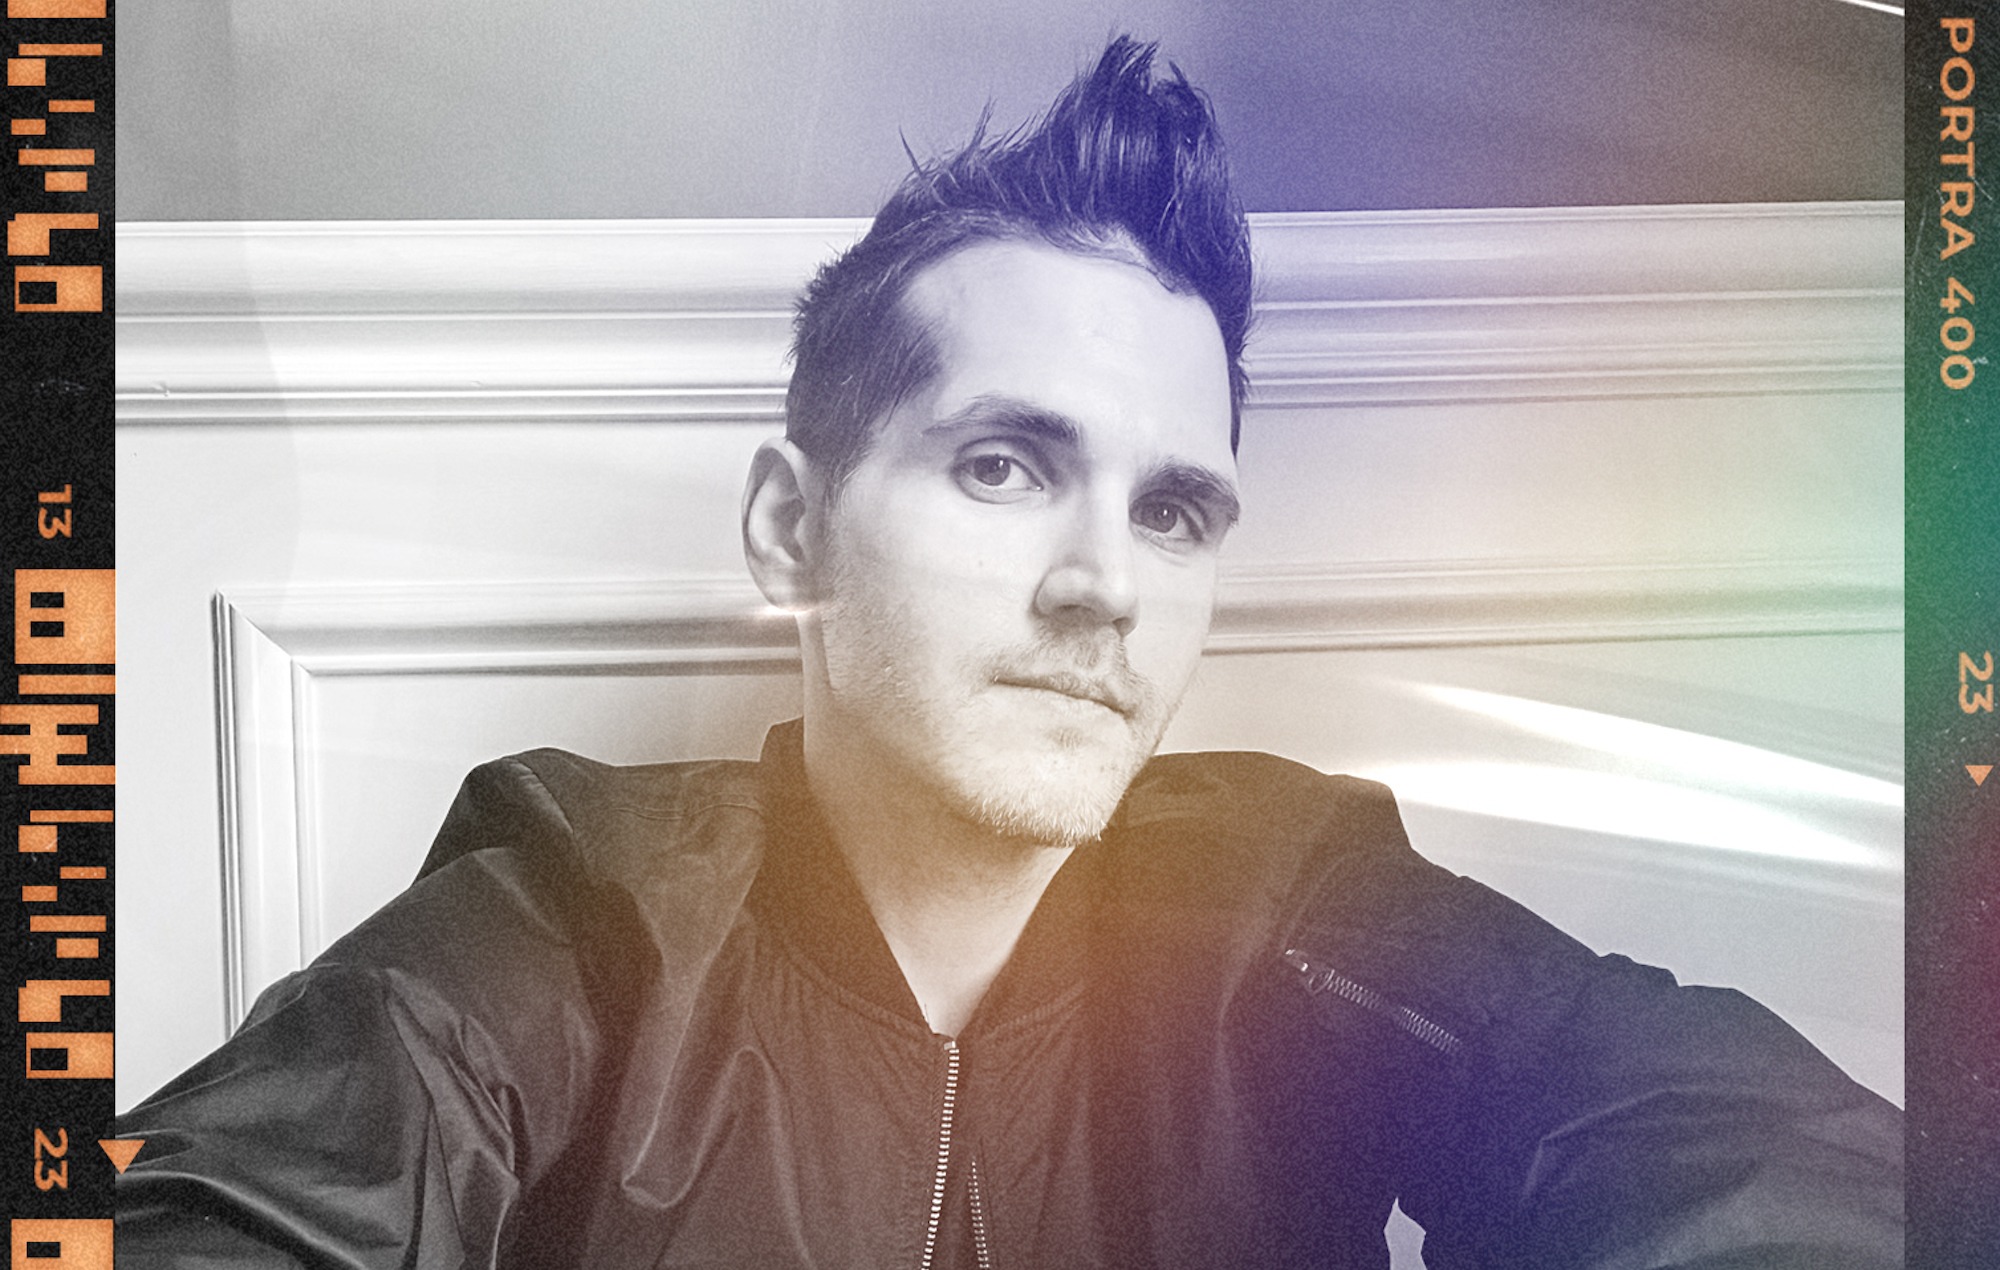 Five things we learned from our In Conversation video chat with Electric Century’s Mikey Way